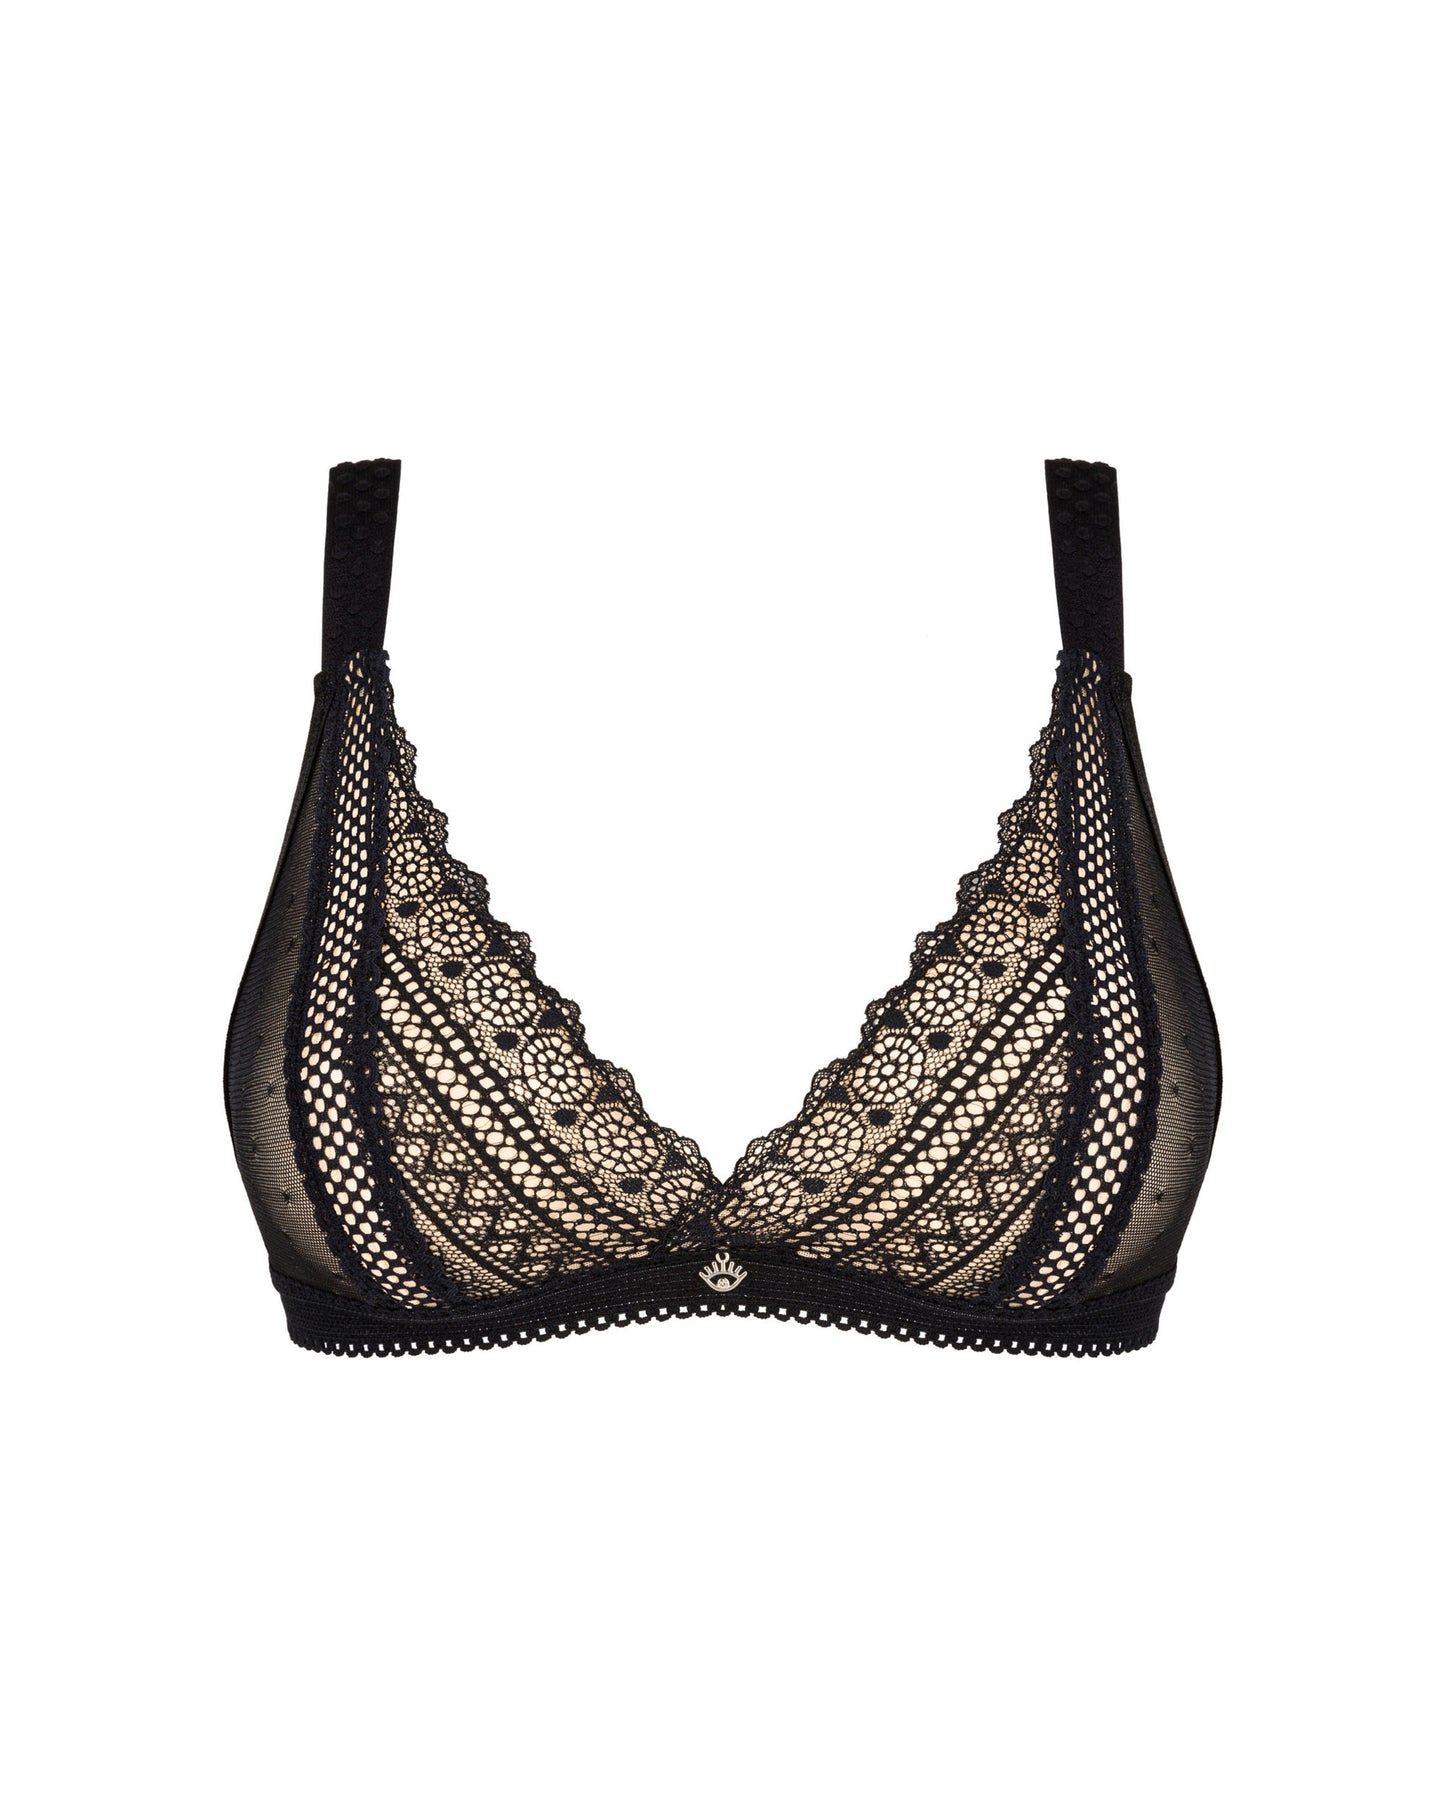 Estiqua a black bra made of elastic and soft material with elegant lace details and a beautiful pendant